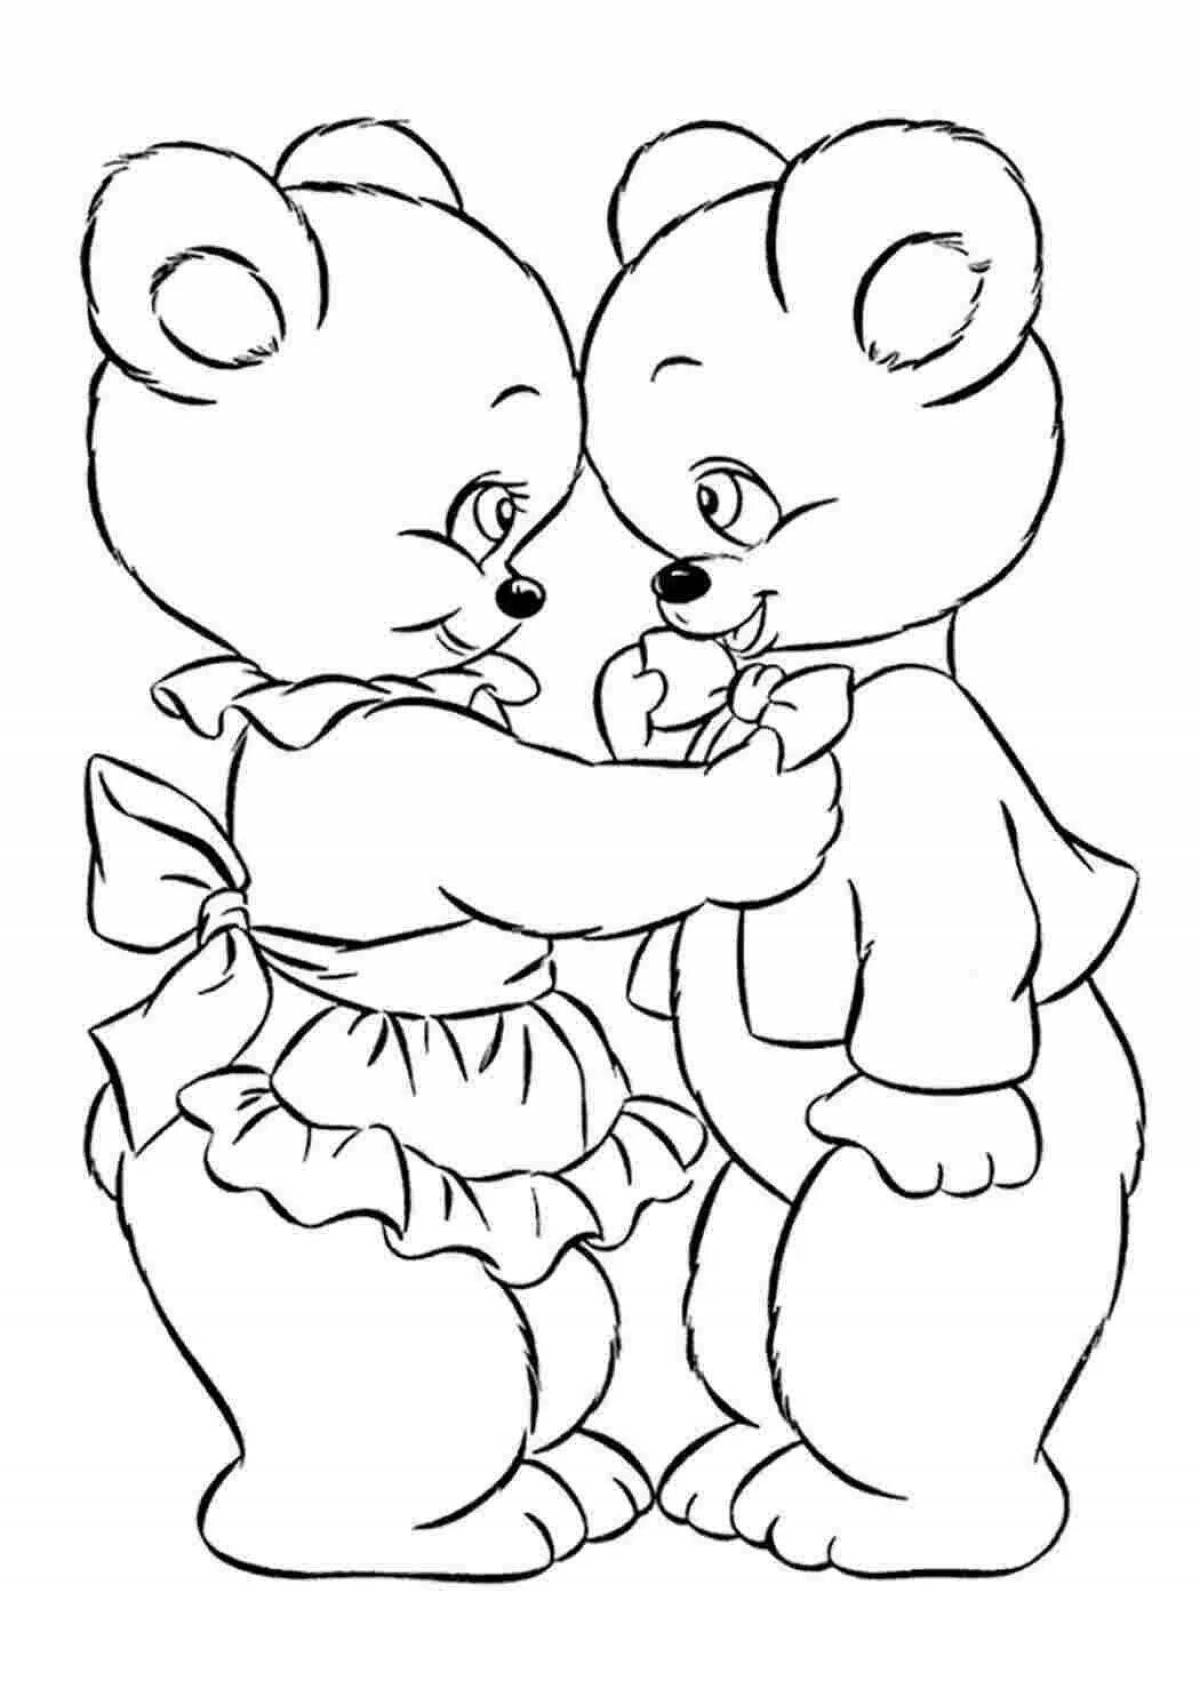 Serene coloring pages for couples